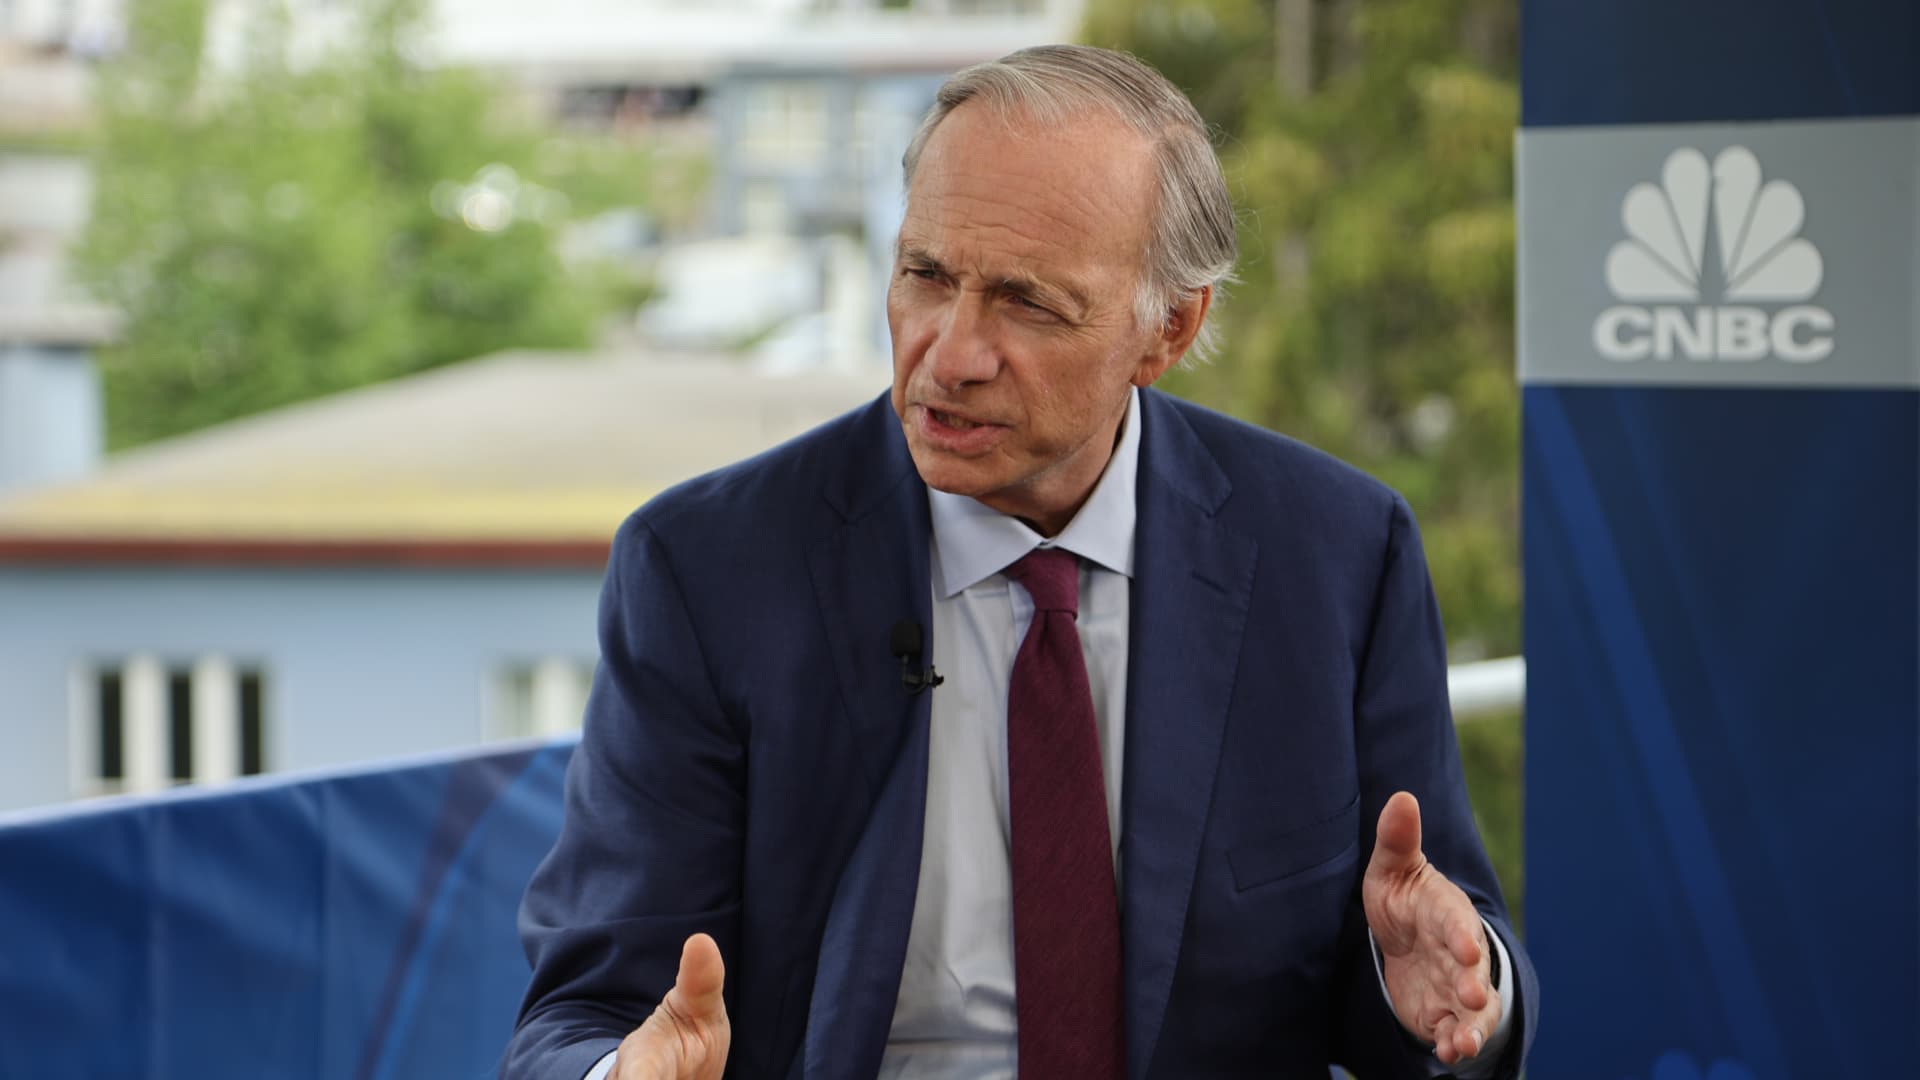 Ray Dalio says cash is more attractive than stocks and bonds on the back of rising rates